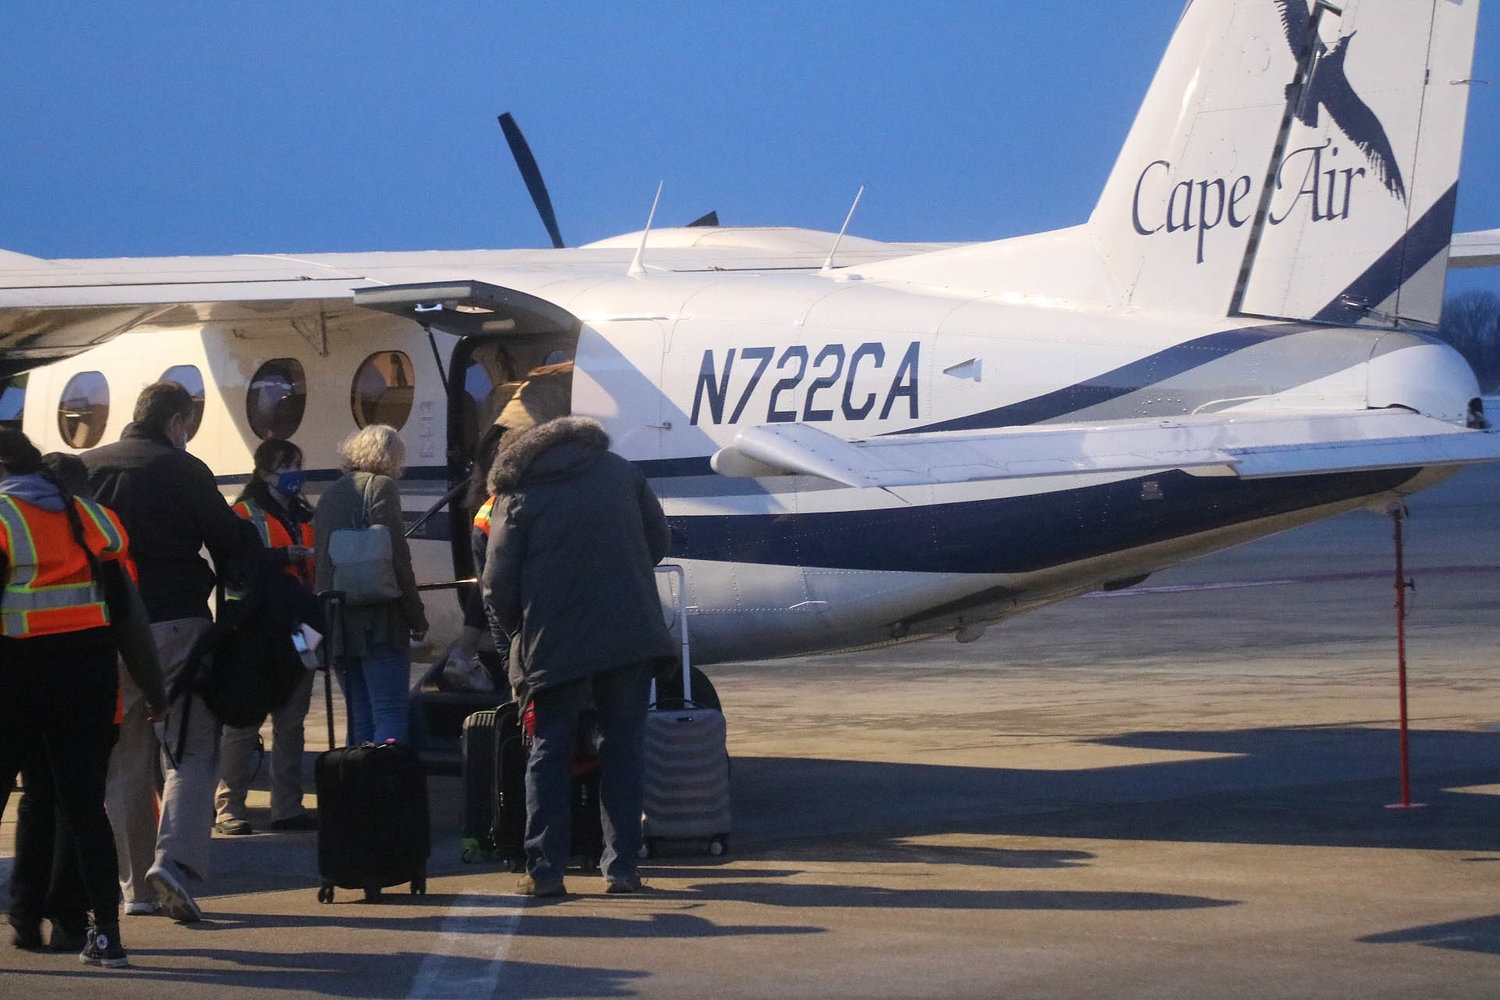 Cape Air, which began services in February, has filed a notice to end Essential Air Services out of Southeast Iowa Regional Airport in Burlington due to a pilot shortage. Photo by Chuck Vandenberg/PCC